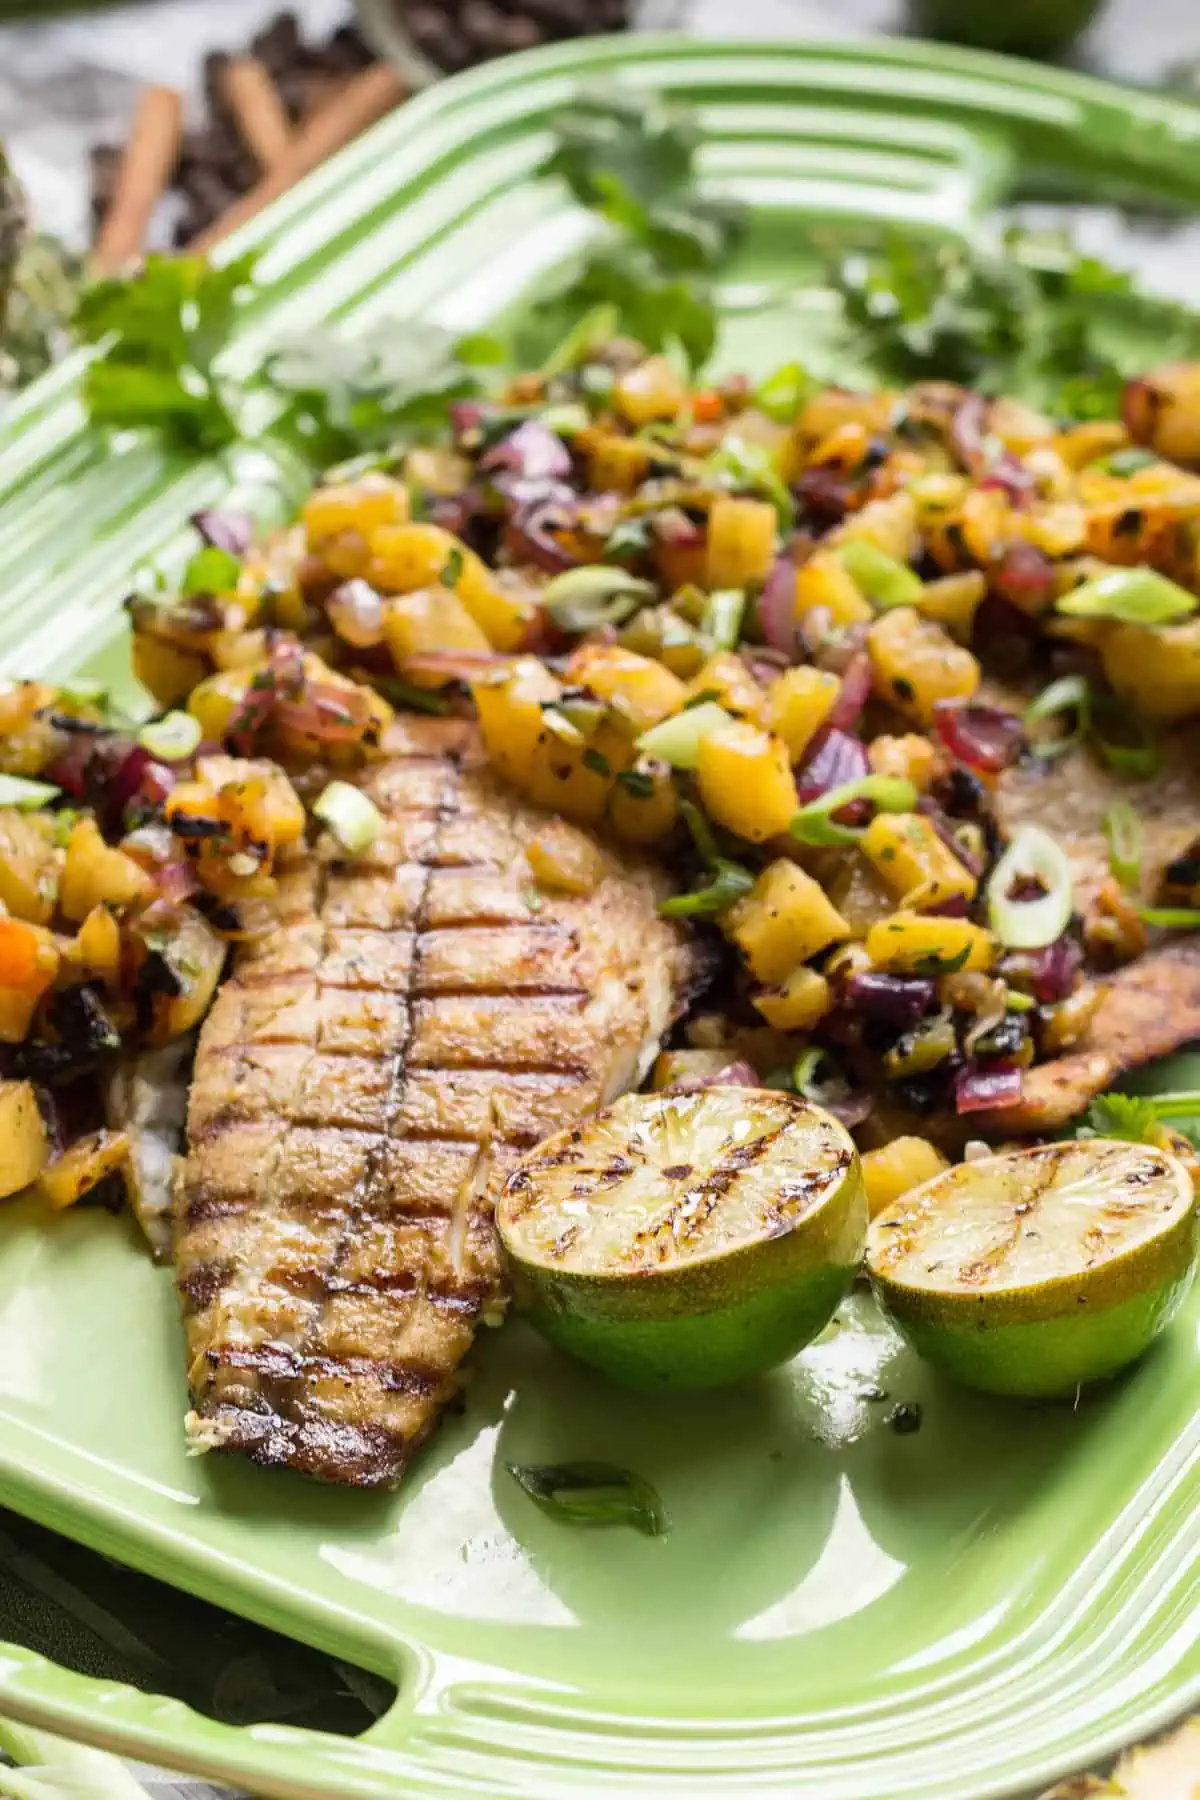 Serving platter with grilled barramundi, lime halves, and fresh pineapple salsa.